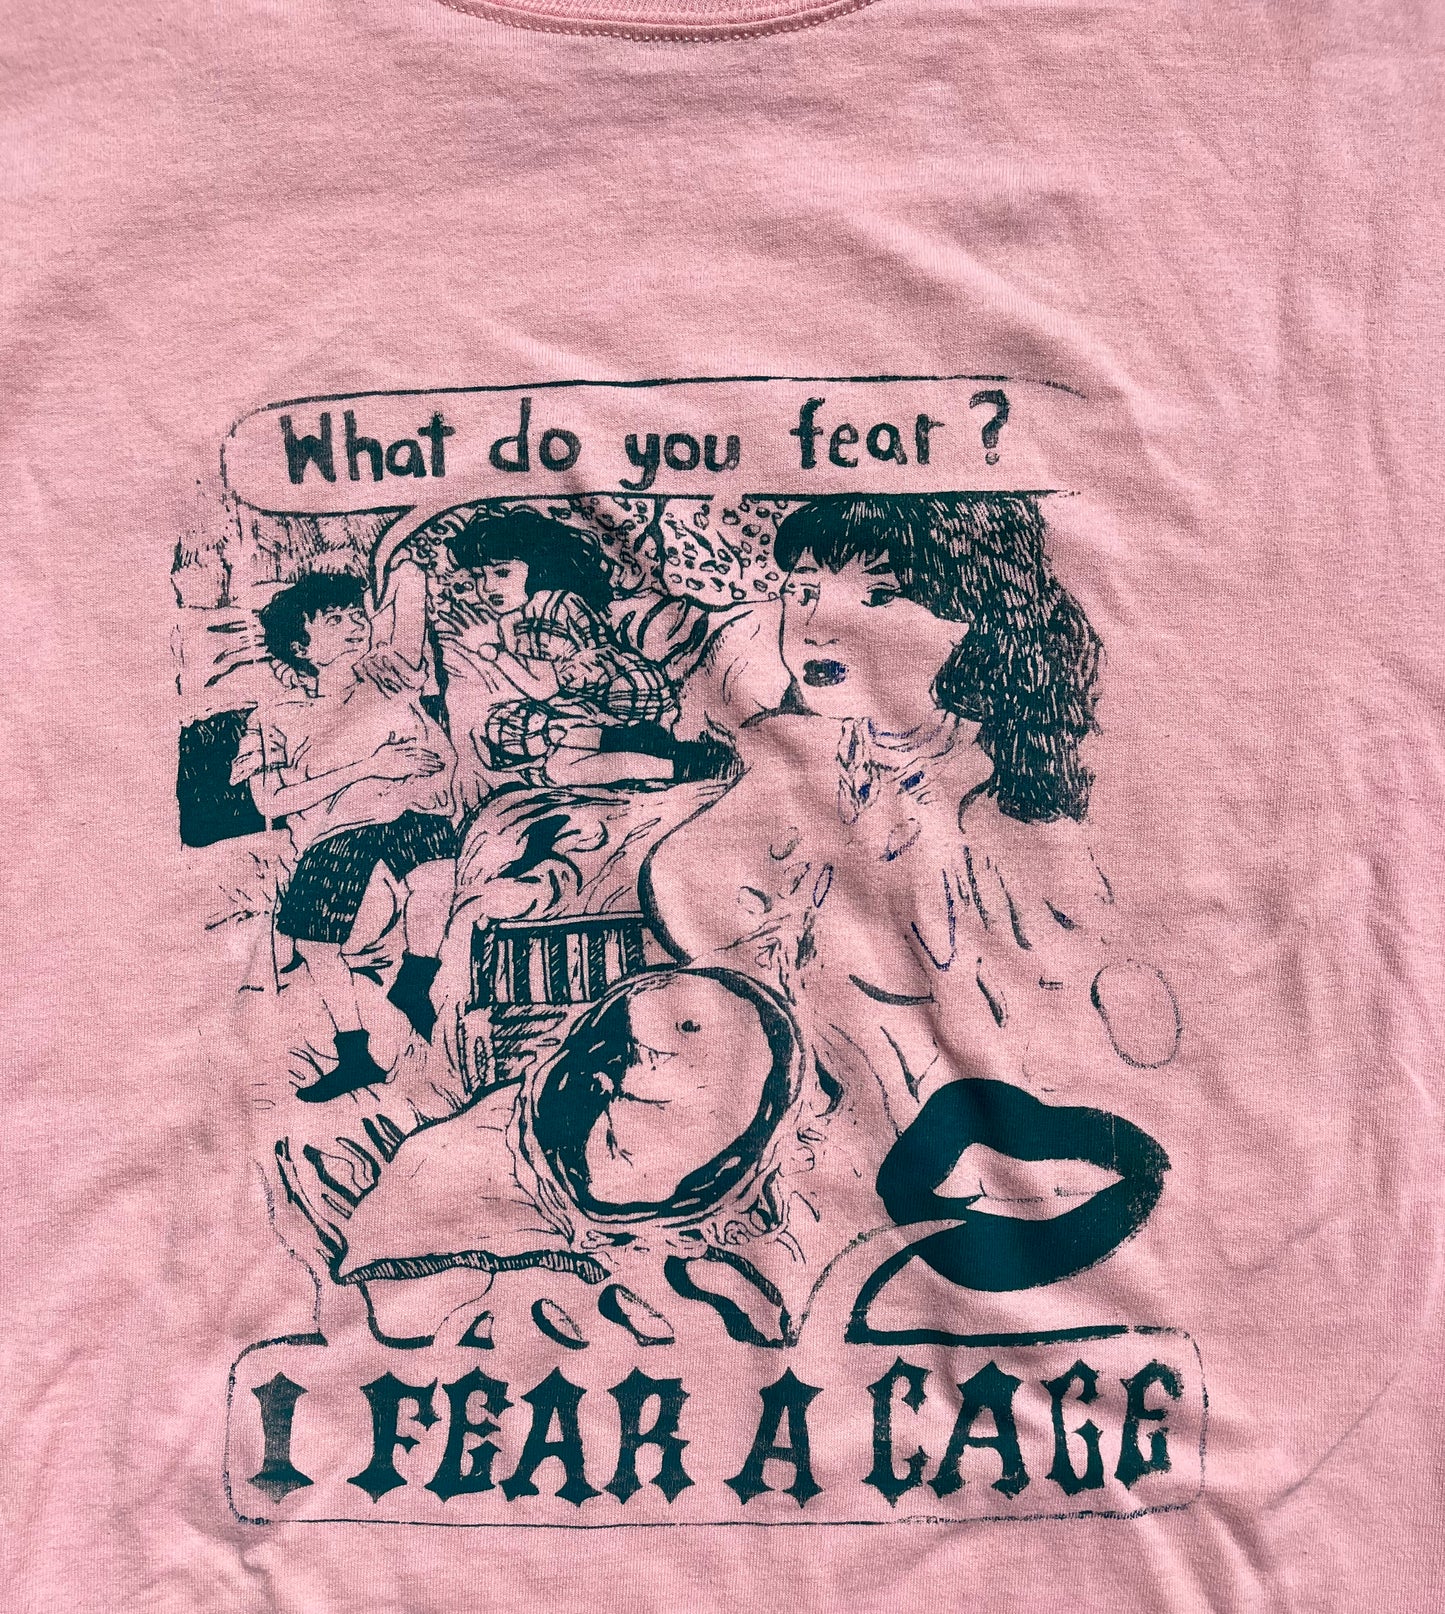 Large I Fear A Cage 01 Graphic Tee Shirt